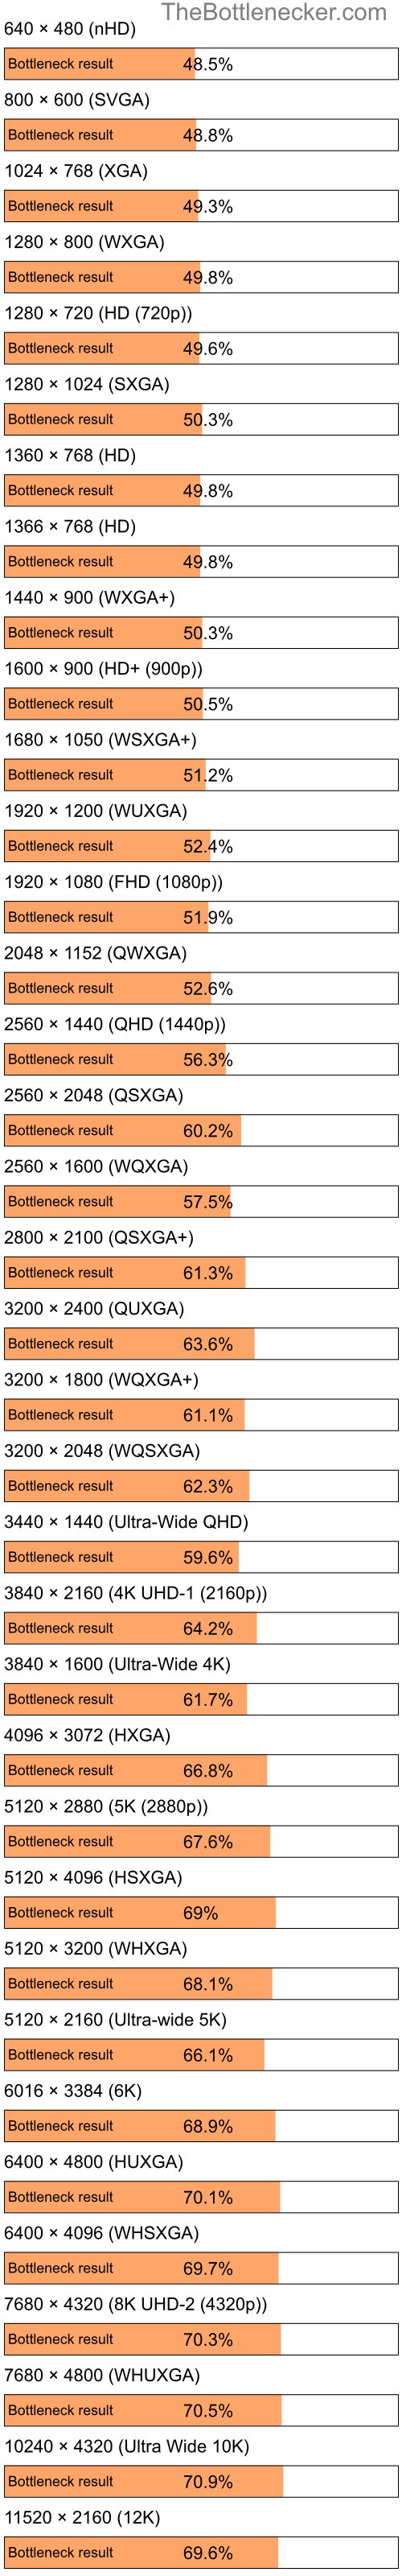 Bottleneck results by resolution for Intel Pentium 4 and NVIDIA GeForce 8300 in Processor Intense Tasks